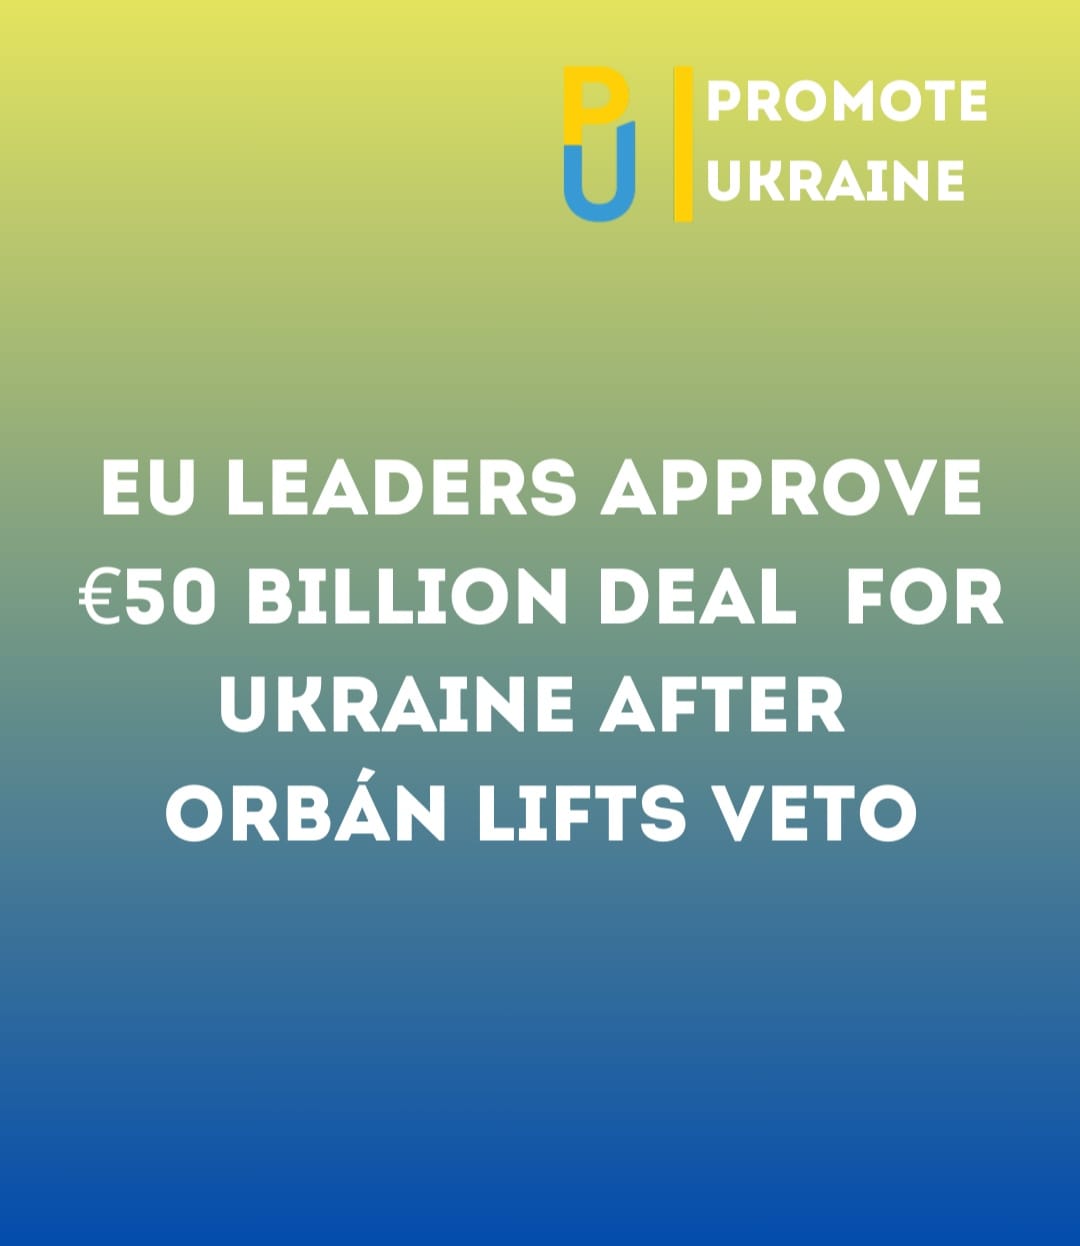 European leaders have reached agreement on support for Ukraine